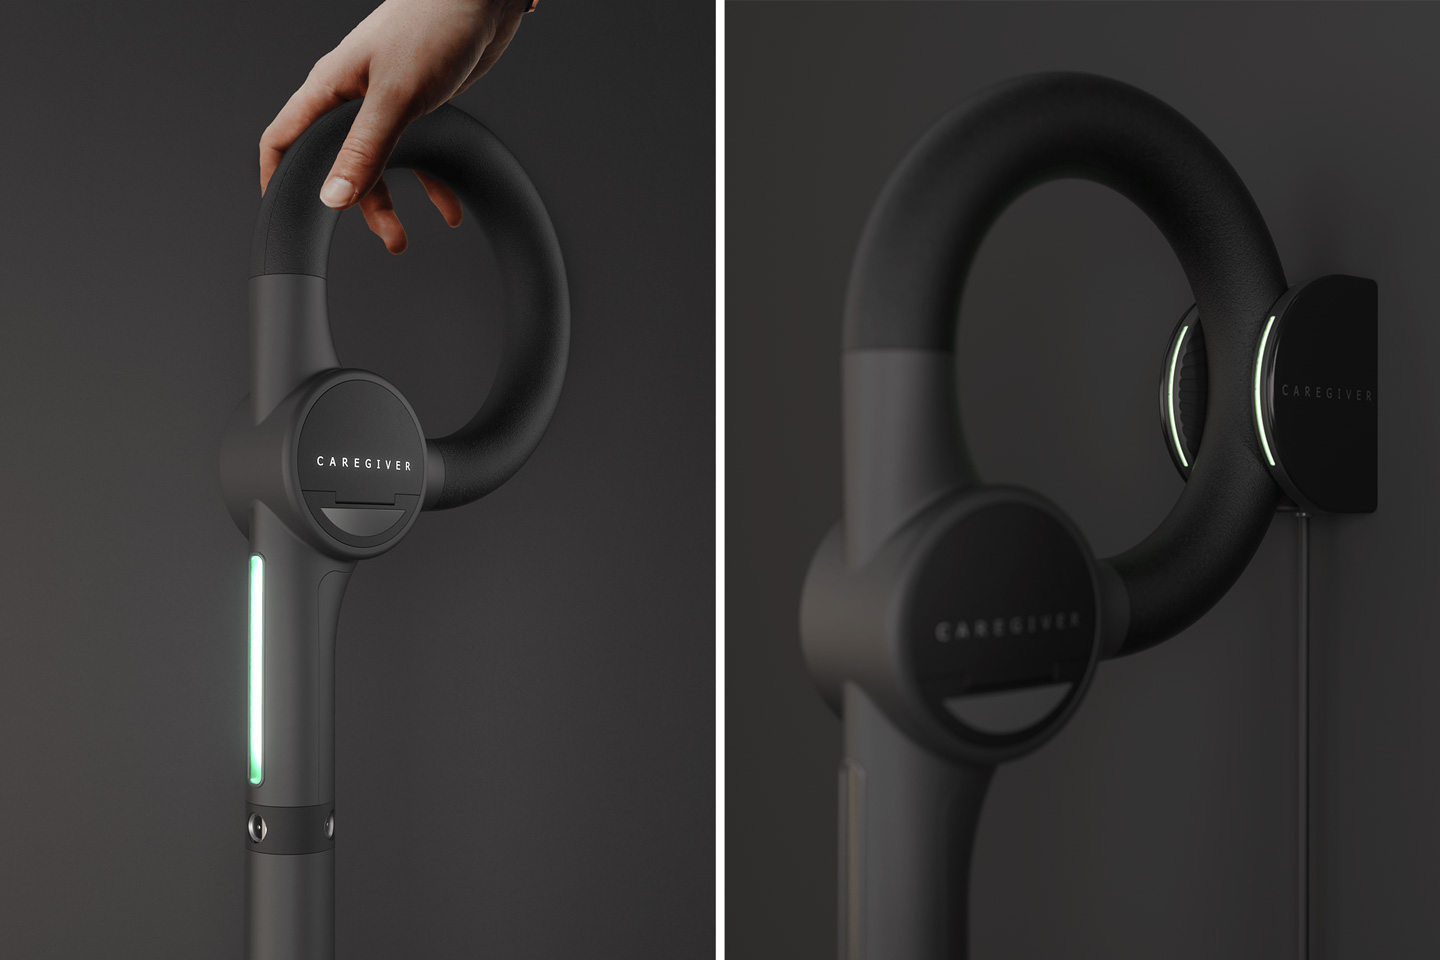 #‘Smart Cane’ for Senior Citizens comes with bone-conducting earphones and object-detecting sensors